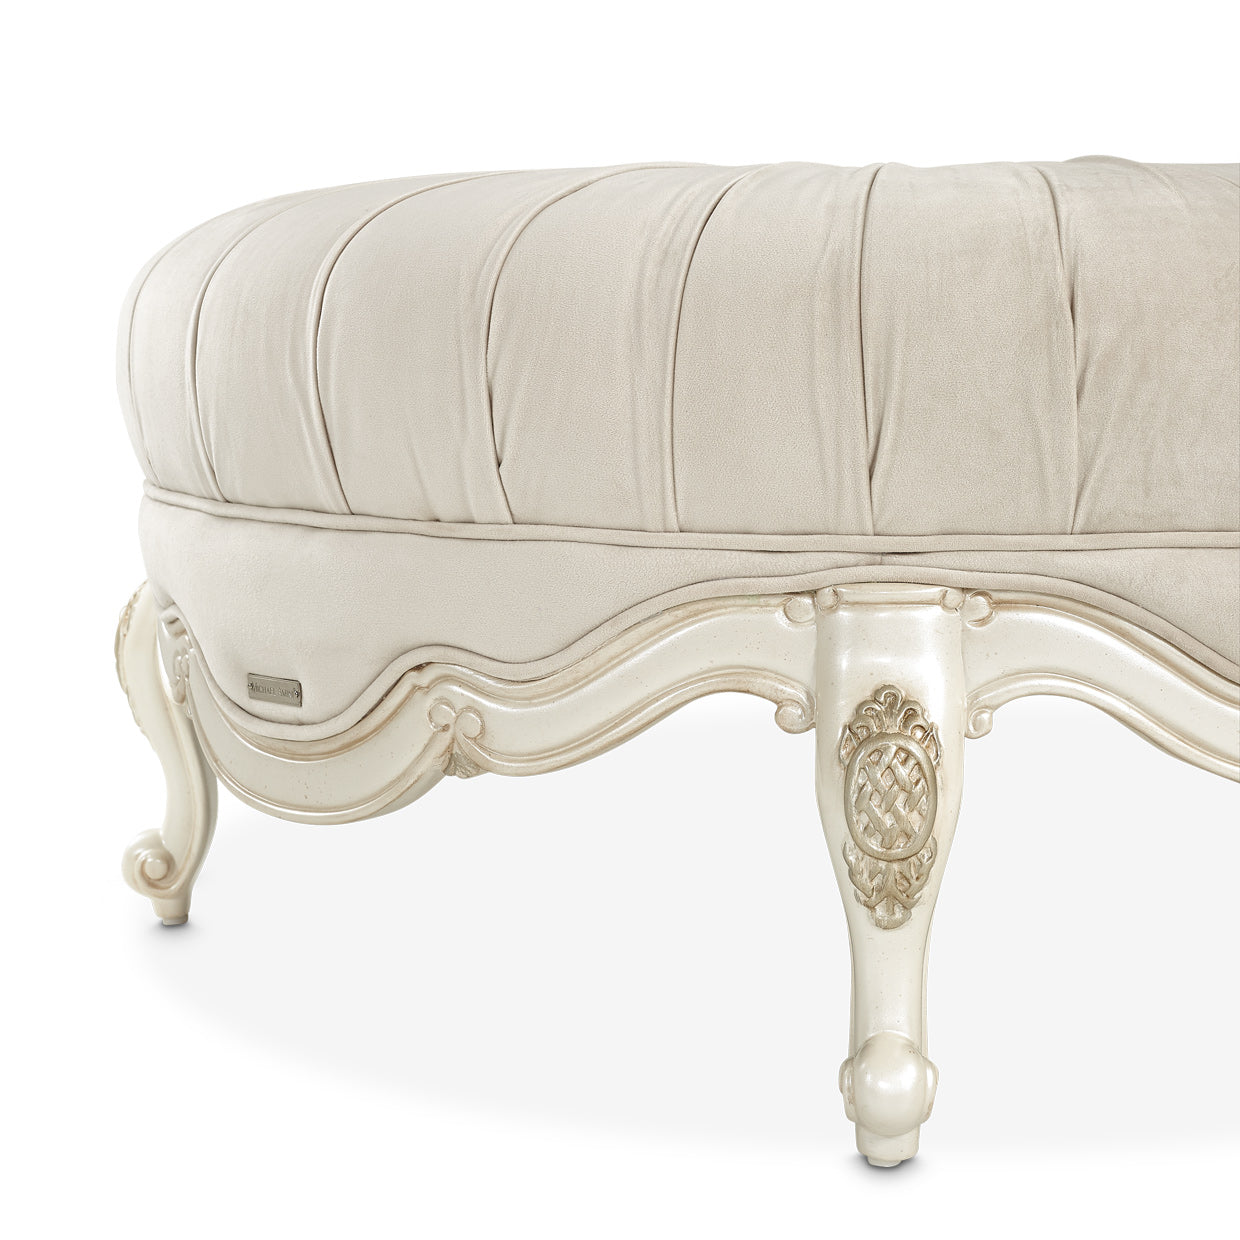 LAVELLE-CLASSIC PEARL Lavelle Rnd Cocktail Ottoman Ivory Classic Pearl - Dream art Gallery